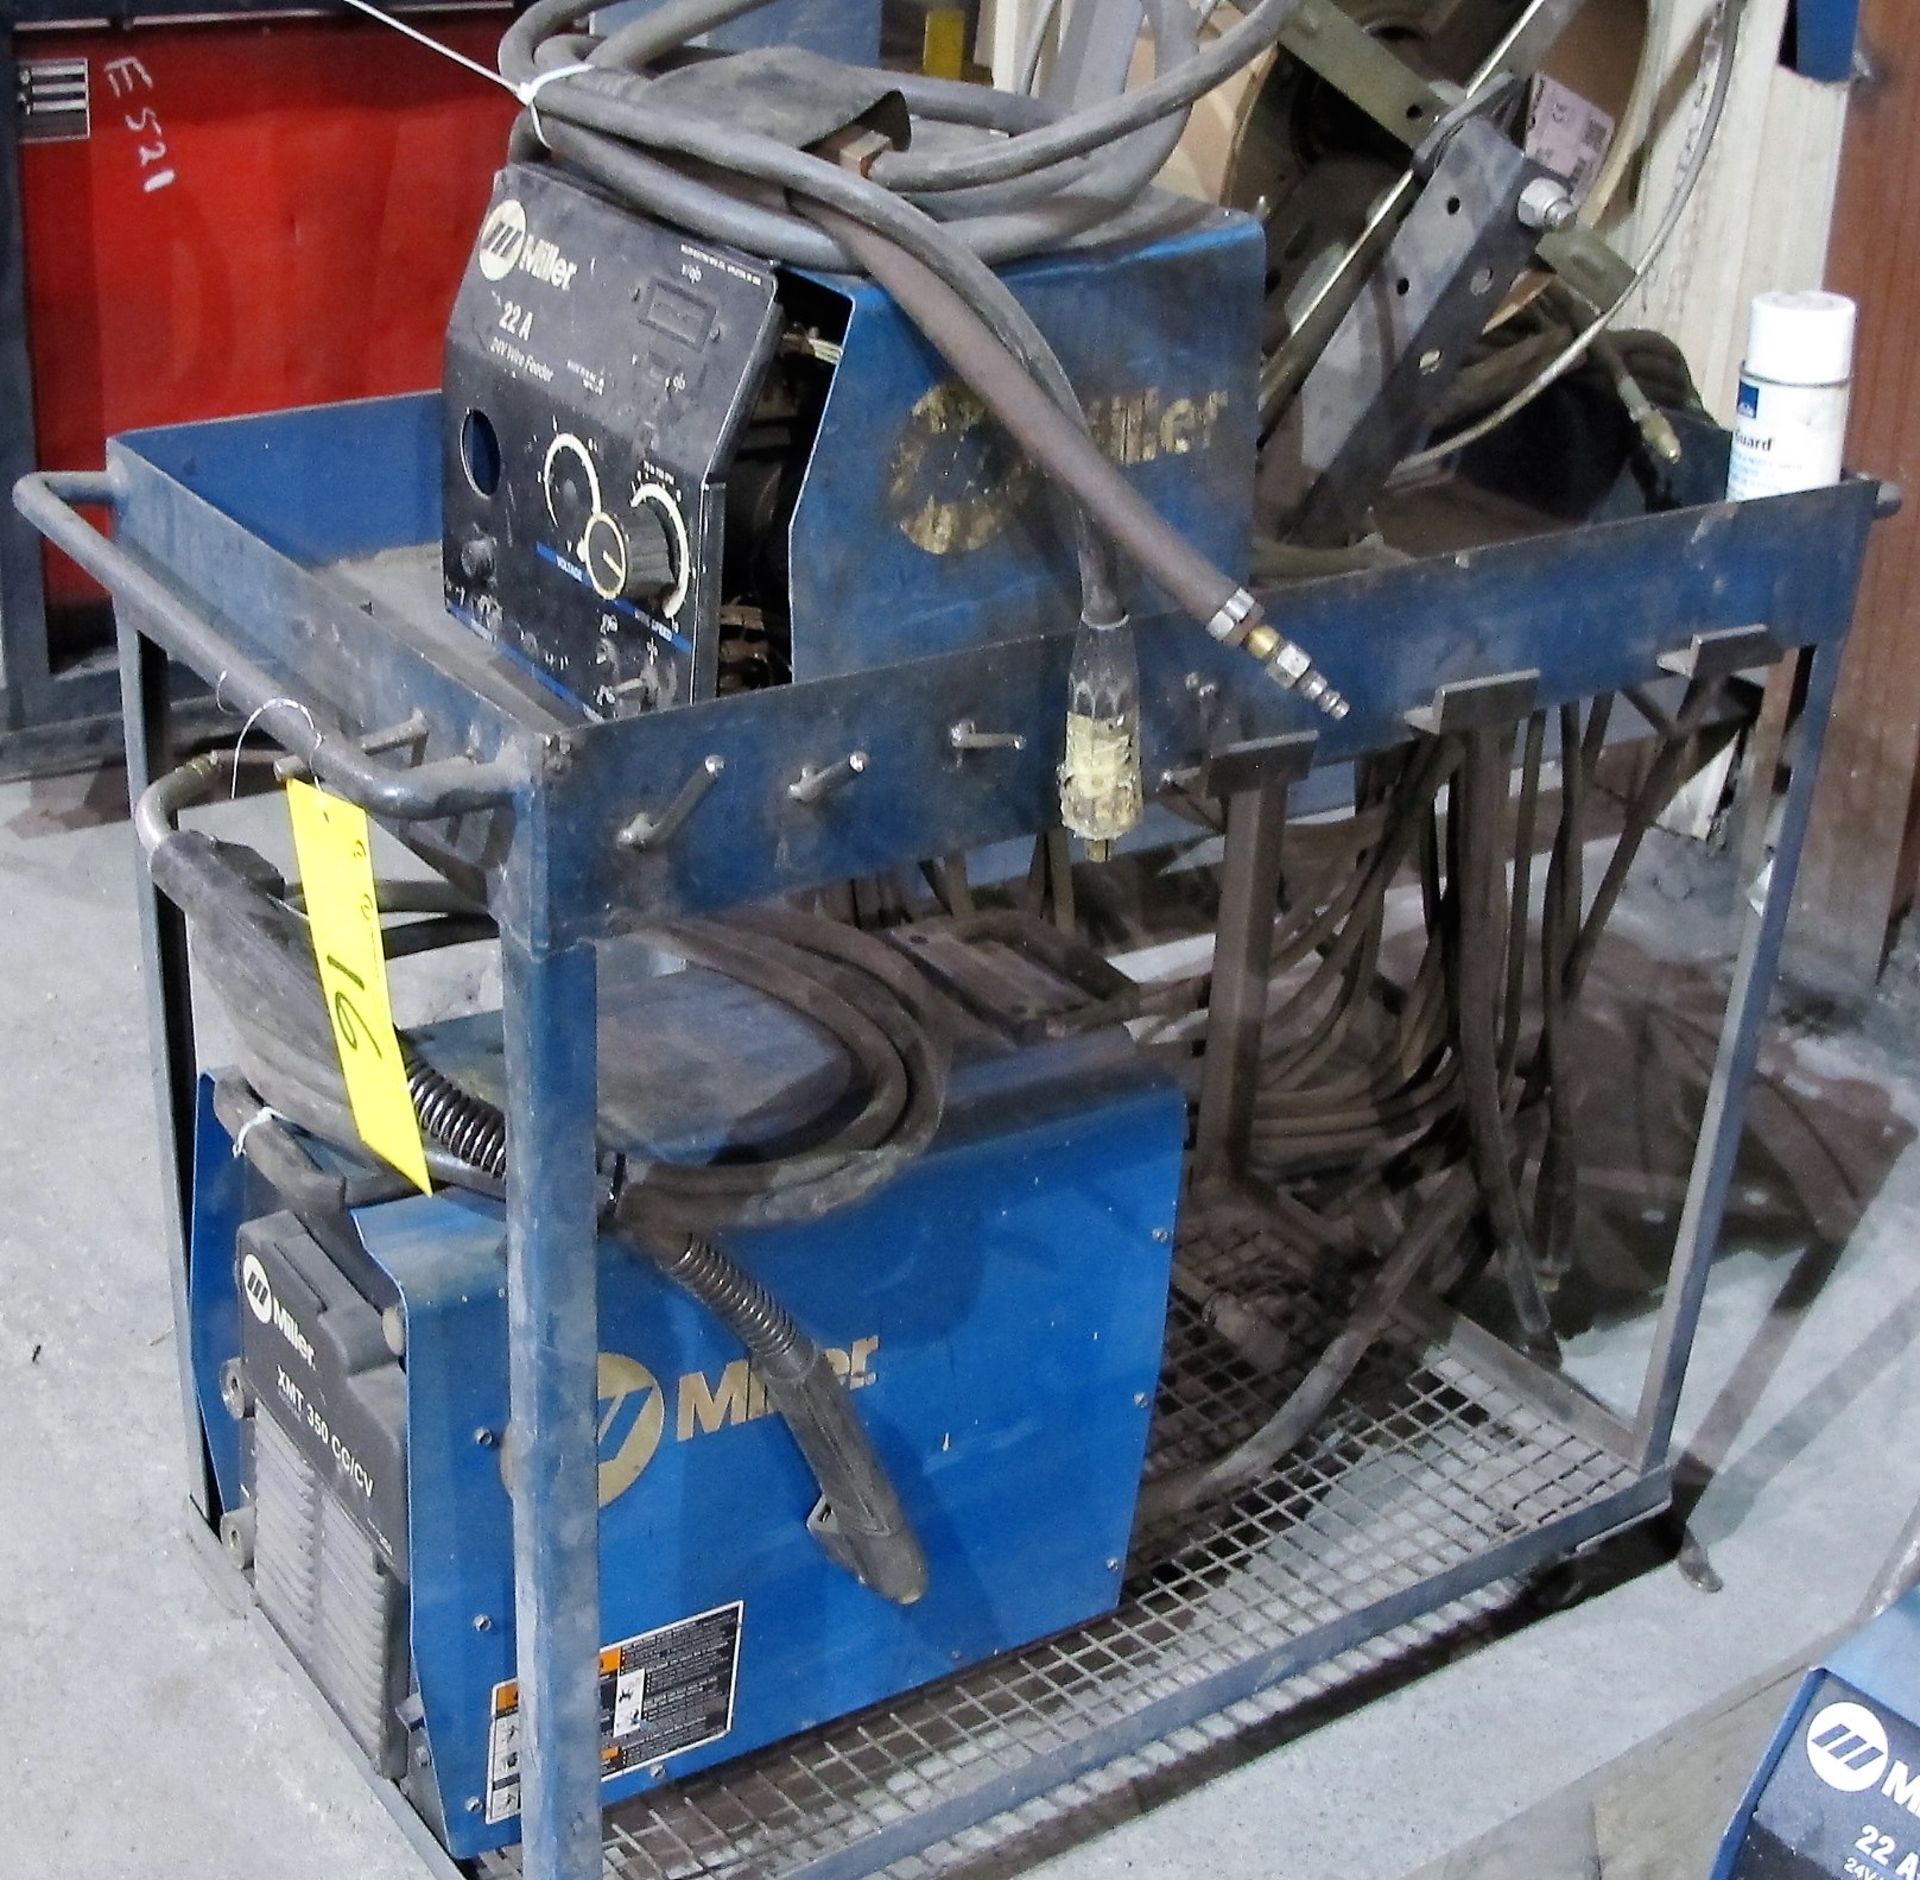 MILLER XMT 350 CC/CW WELDER, S/N LF470022A W/ MILLER 22A WIRE FEEDER, CABLES & CART - Image 2 of 4